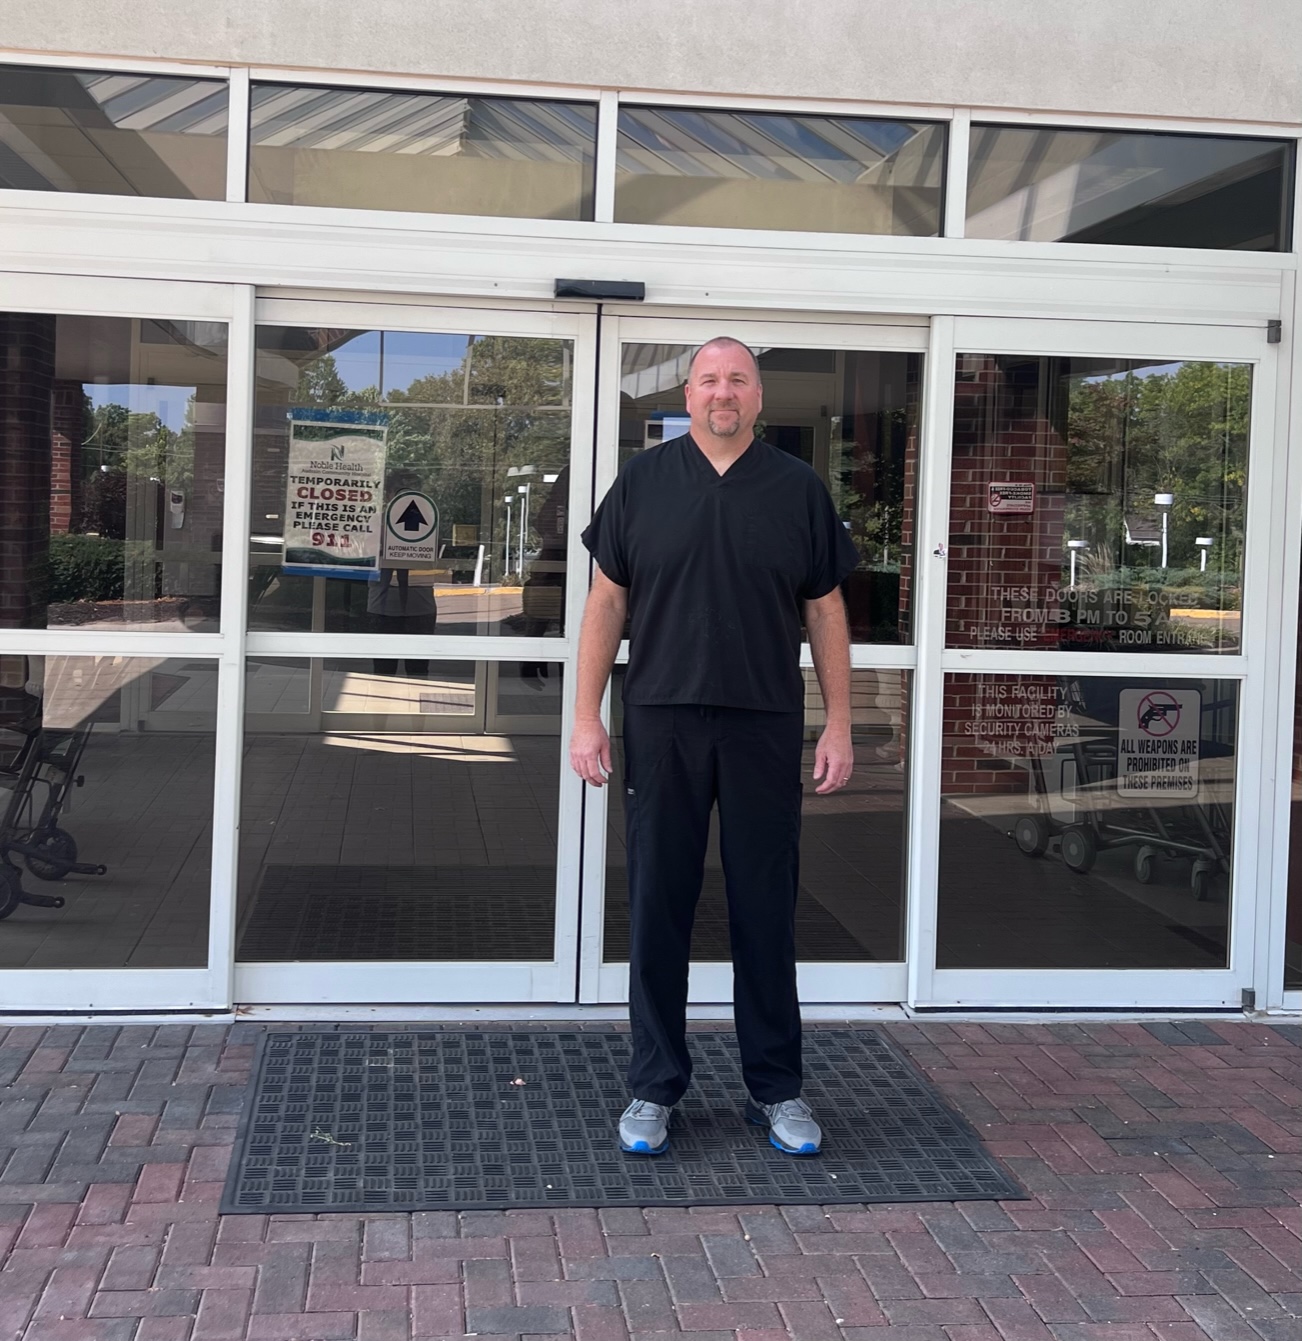 The photo shows Paul Huemann standing in front of the closed doors of Audrain Community Hospital.